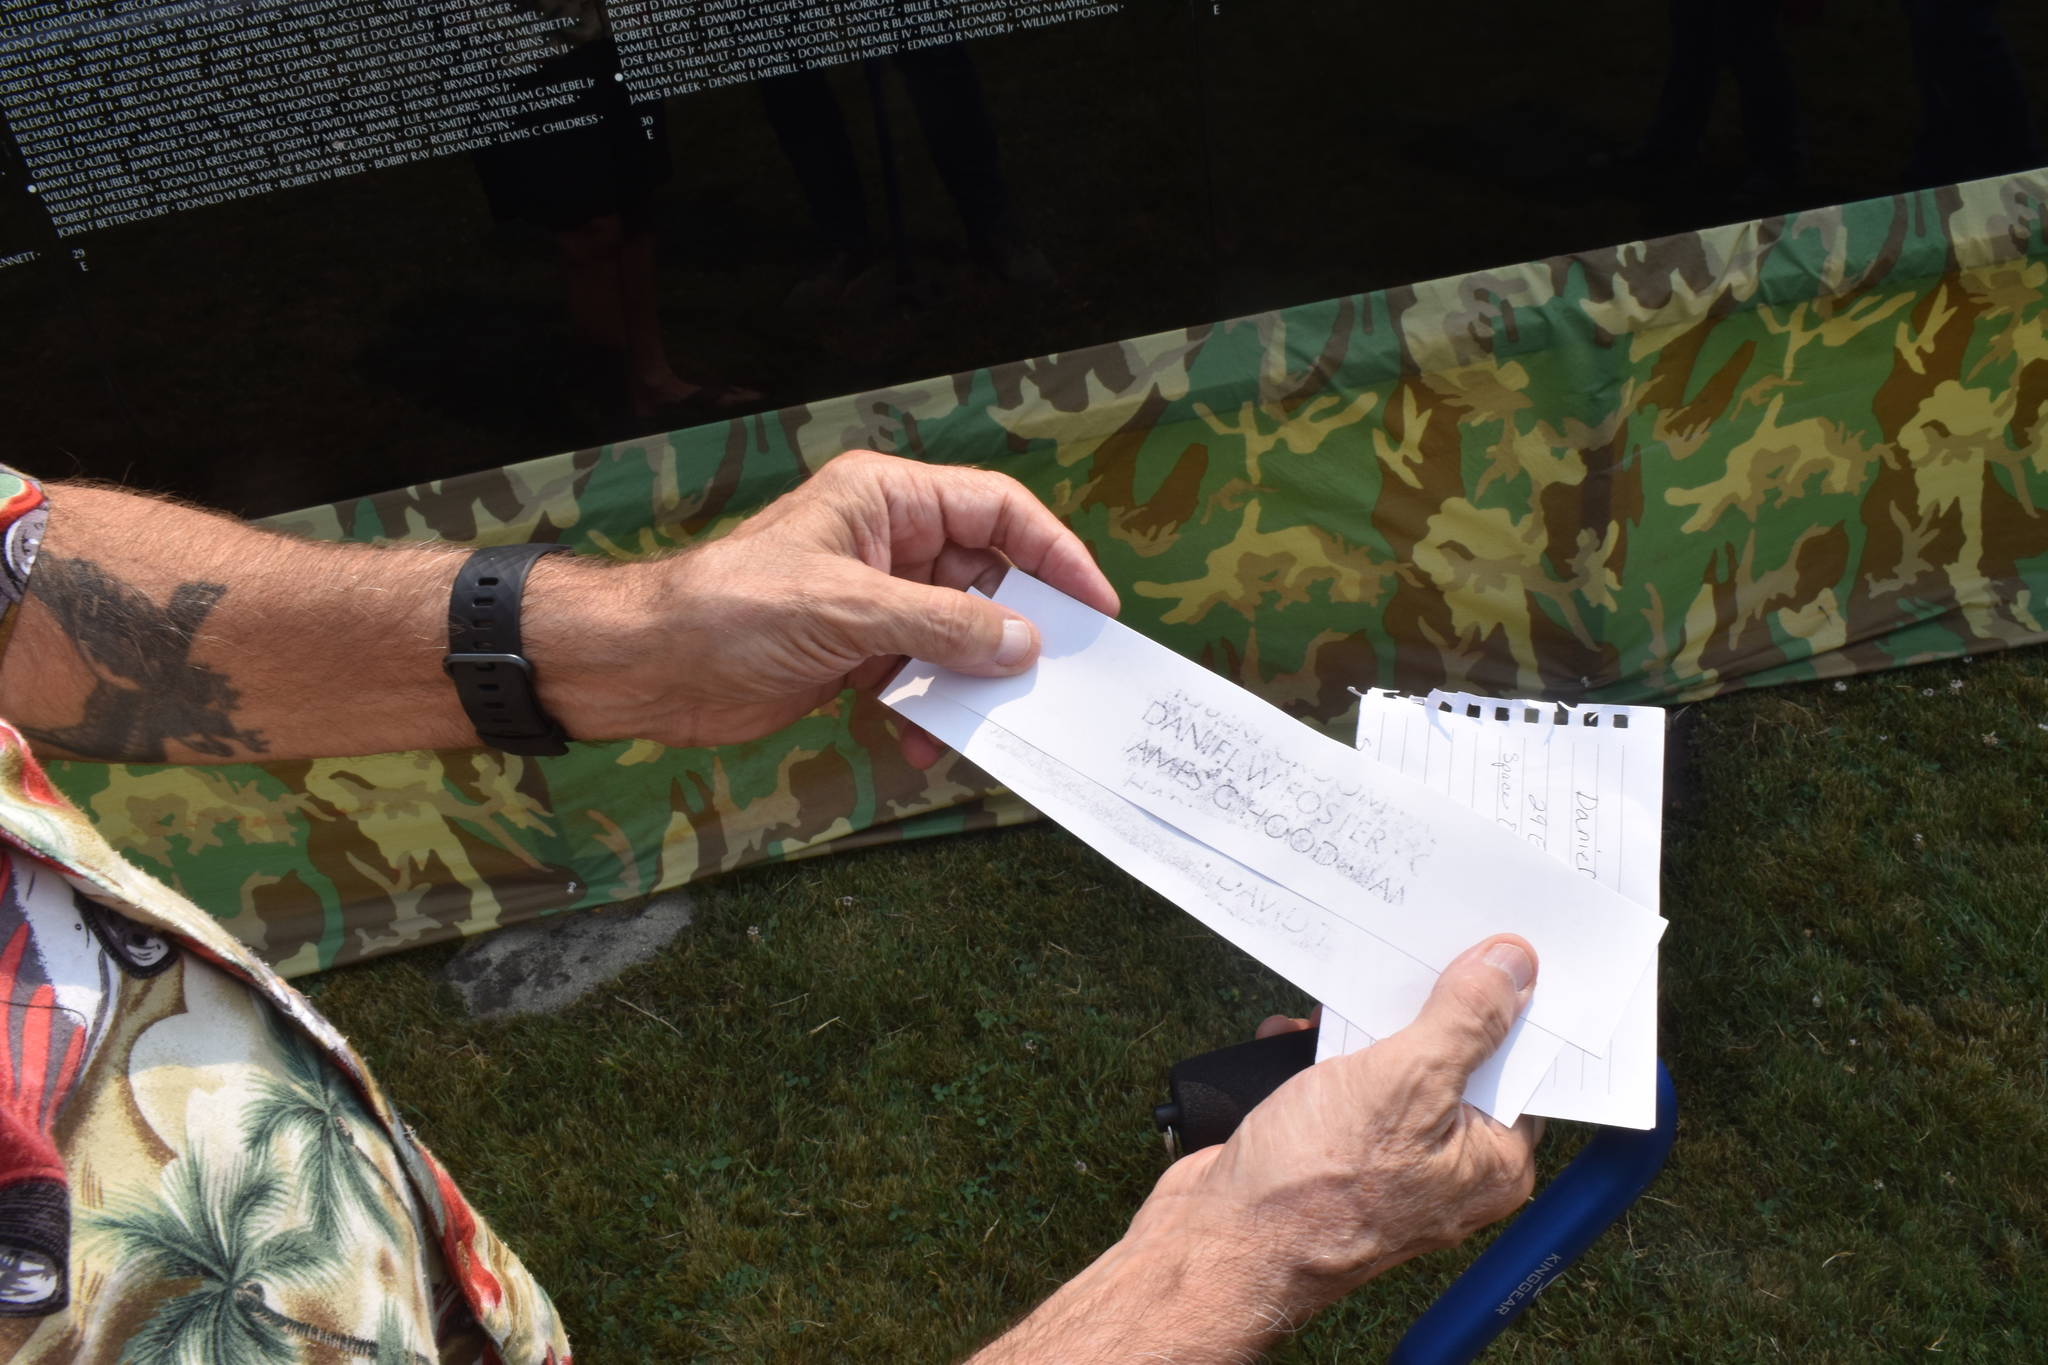 Bob Valentine holds a rubbing of the names of two people he knew who died in the Vietnam War.